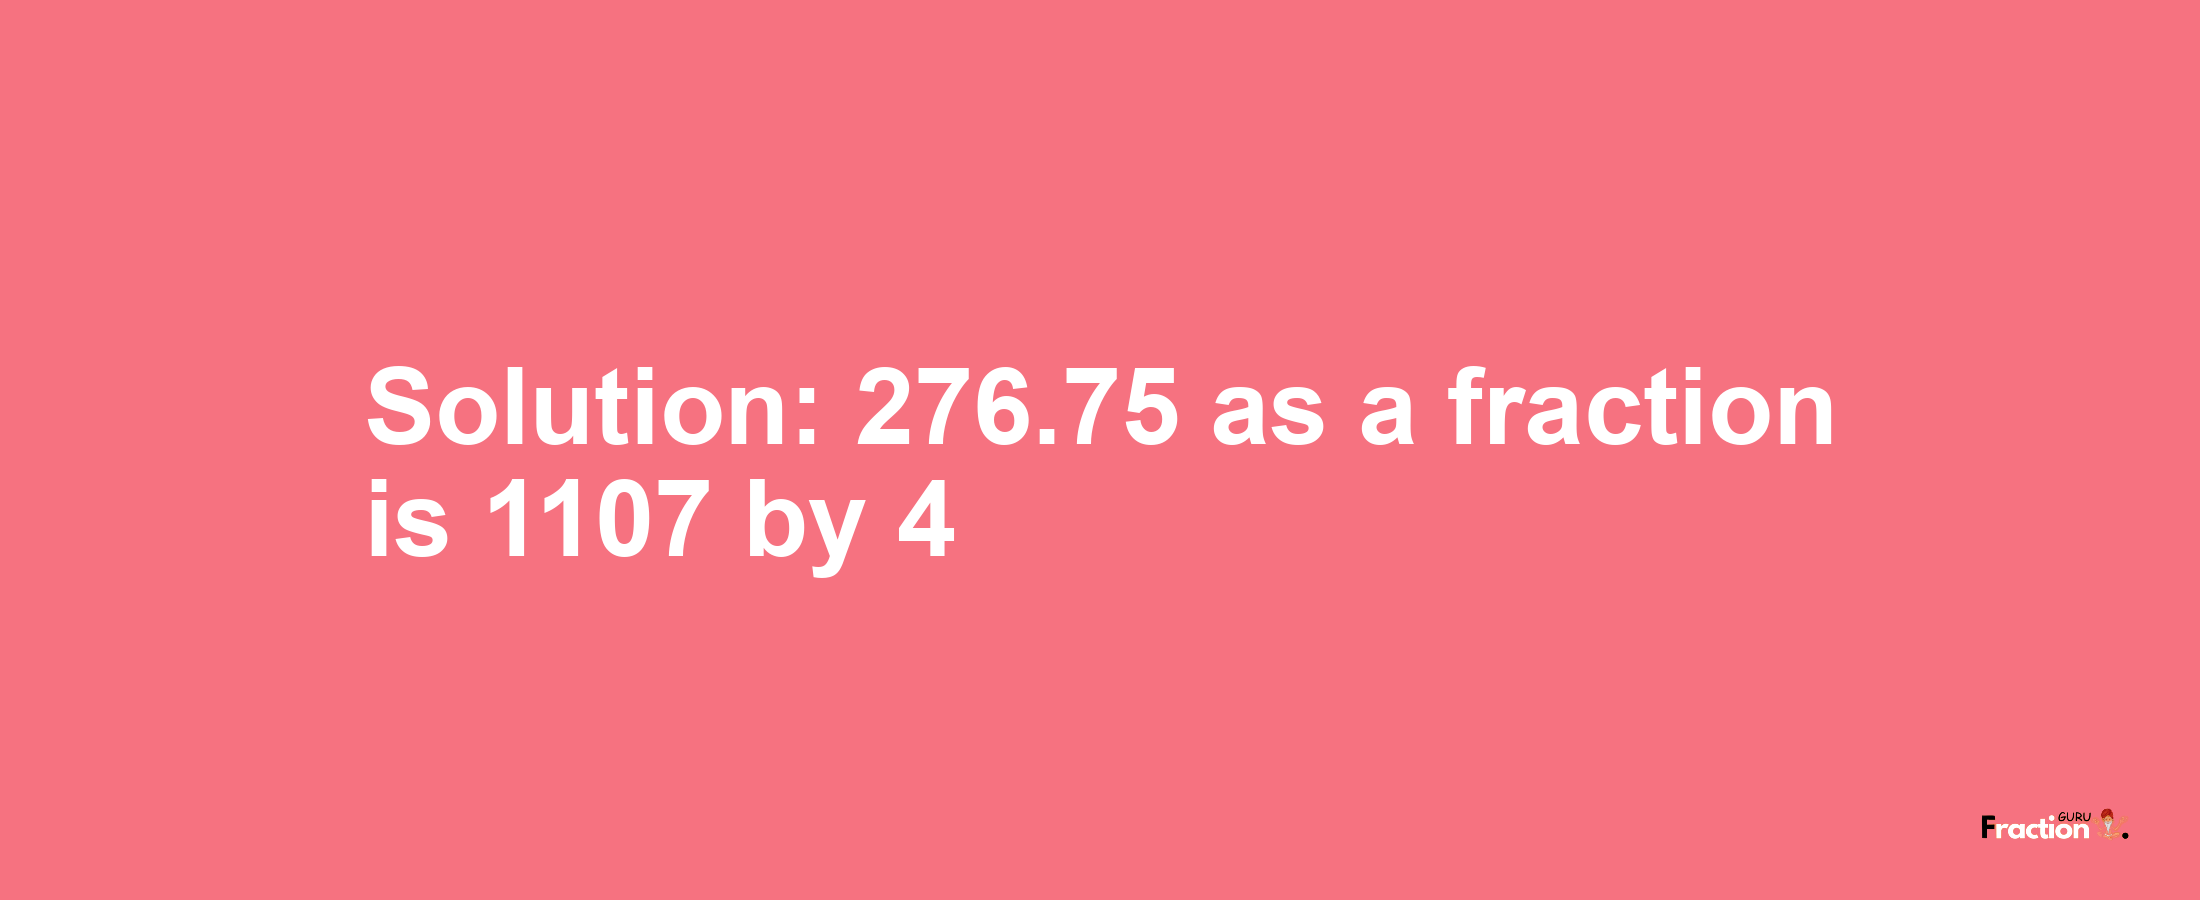 Solution:276.75 as a fraction is 1107/4